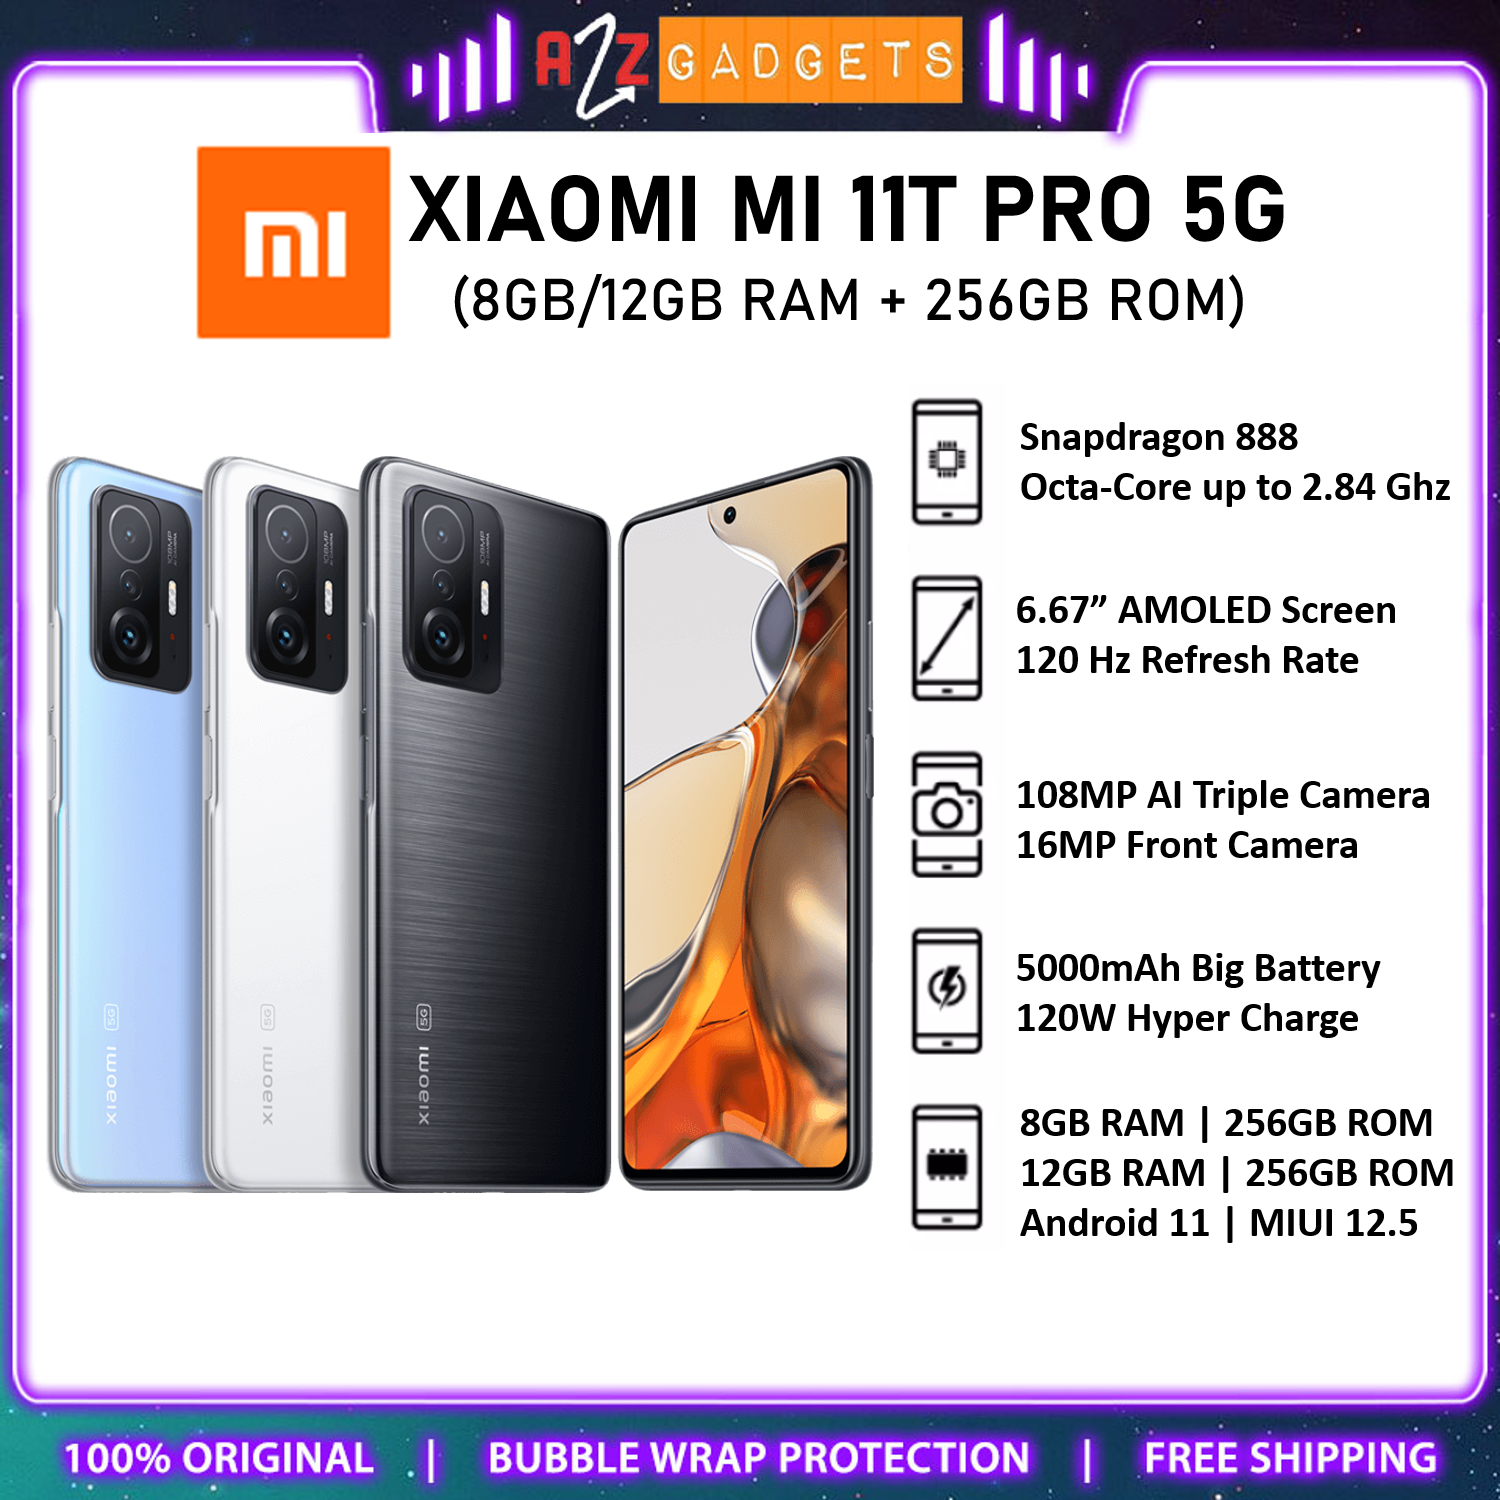 Xiaomi 11T Pro 5G goes on sale in India: Sports 120W fast charging, 108MP  camera